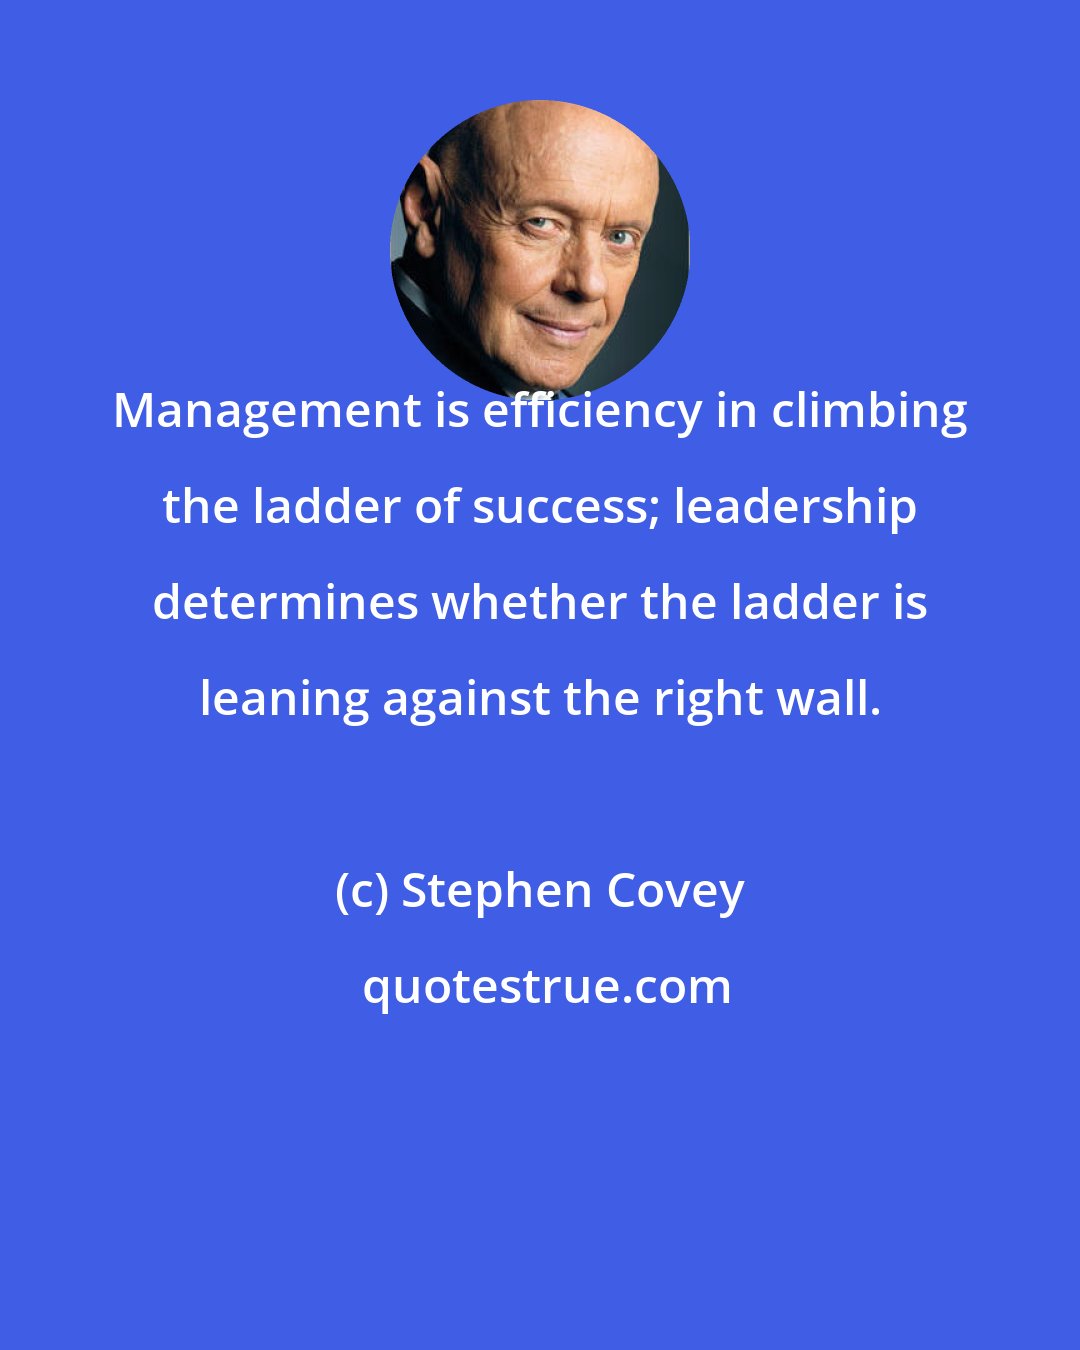 Stephen Covey: Management is efficiency in climbing the ladder of success; leadership determines whether the ladder is leaning against the right wall.